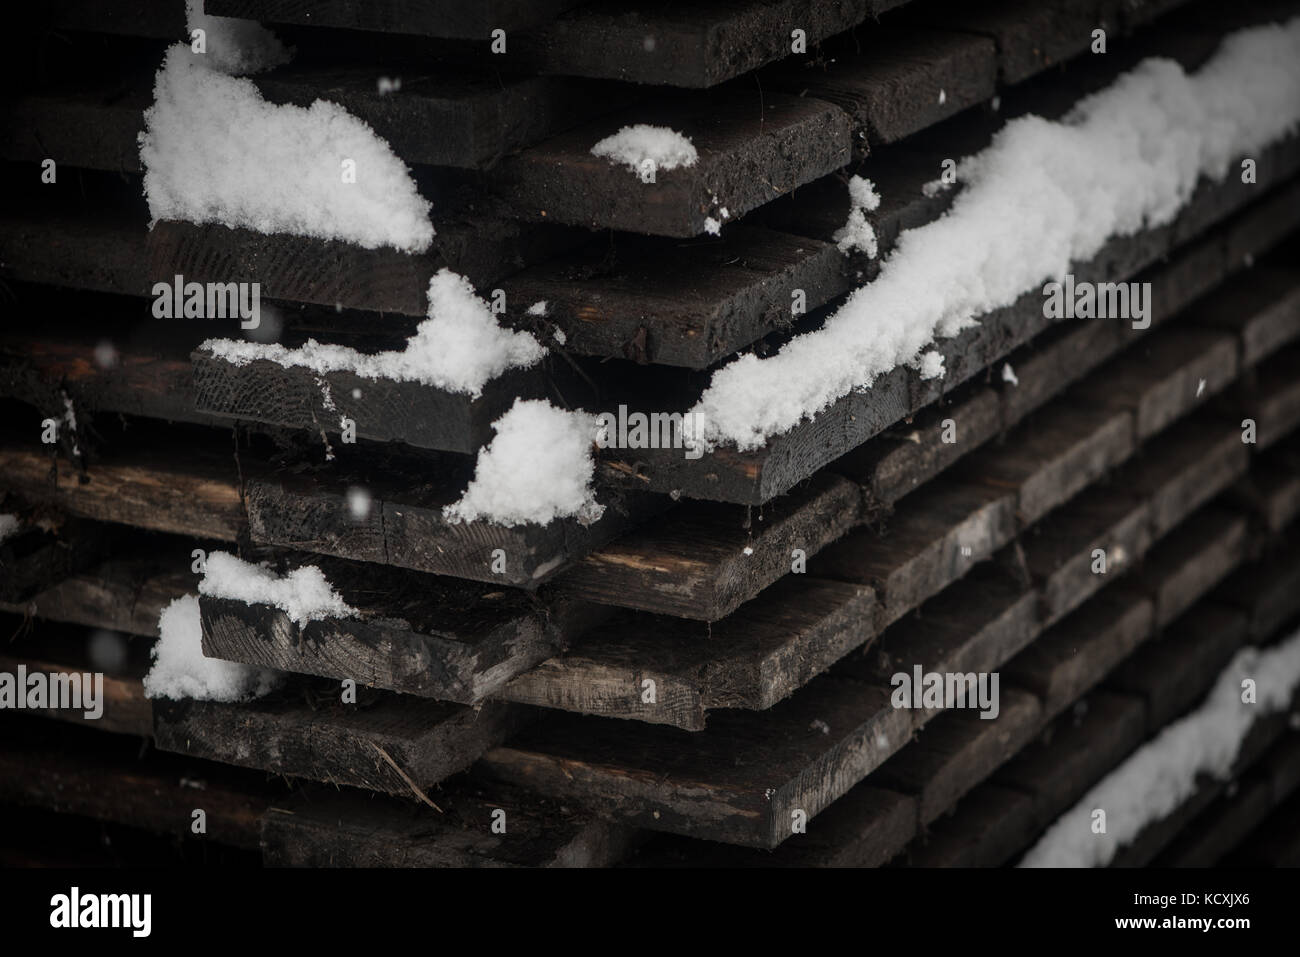 Stacks of construction wood in winter covered with snow Stock Photo